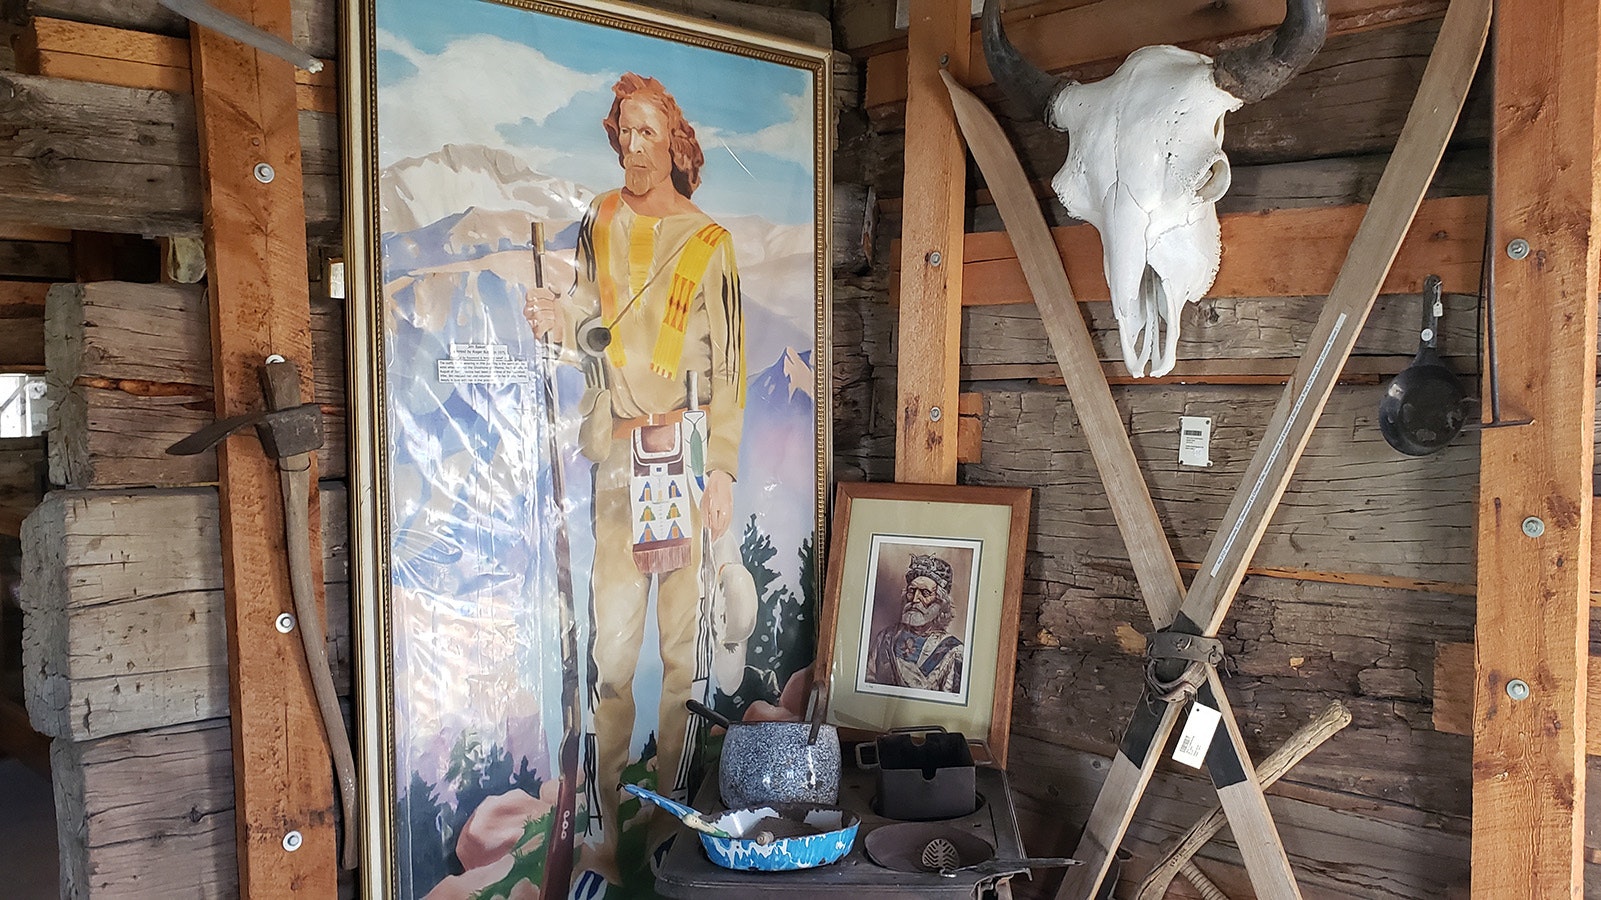 Some of the portraits of Jim Baker are displayed inside the cabin fortress the mountain man built in Savery.